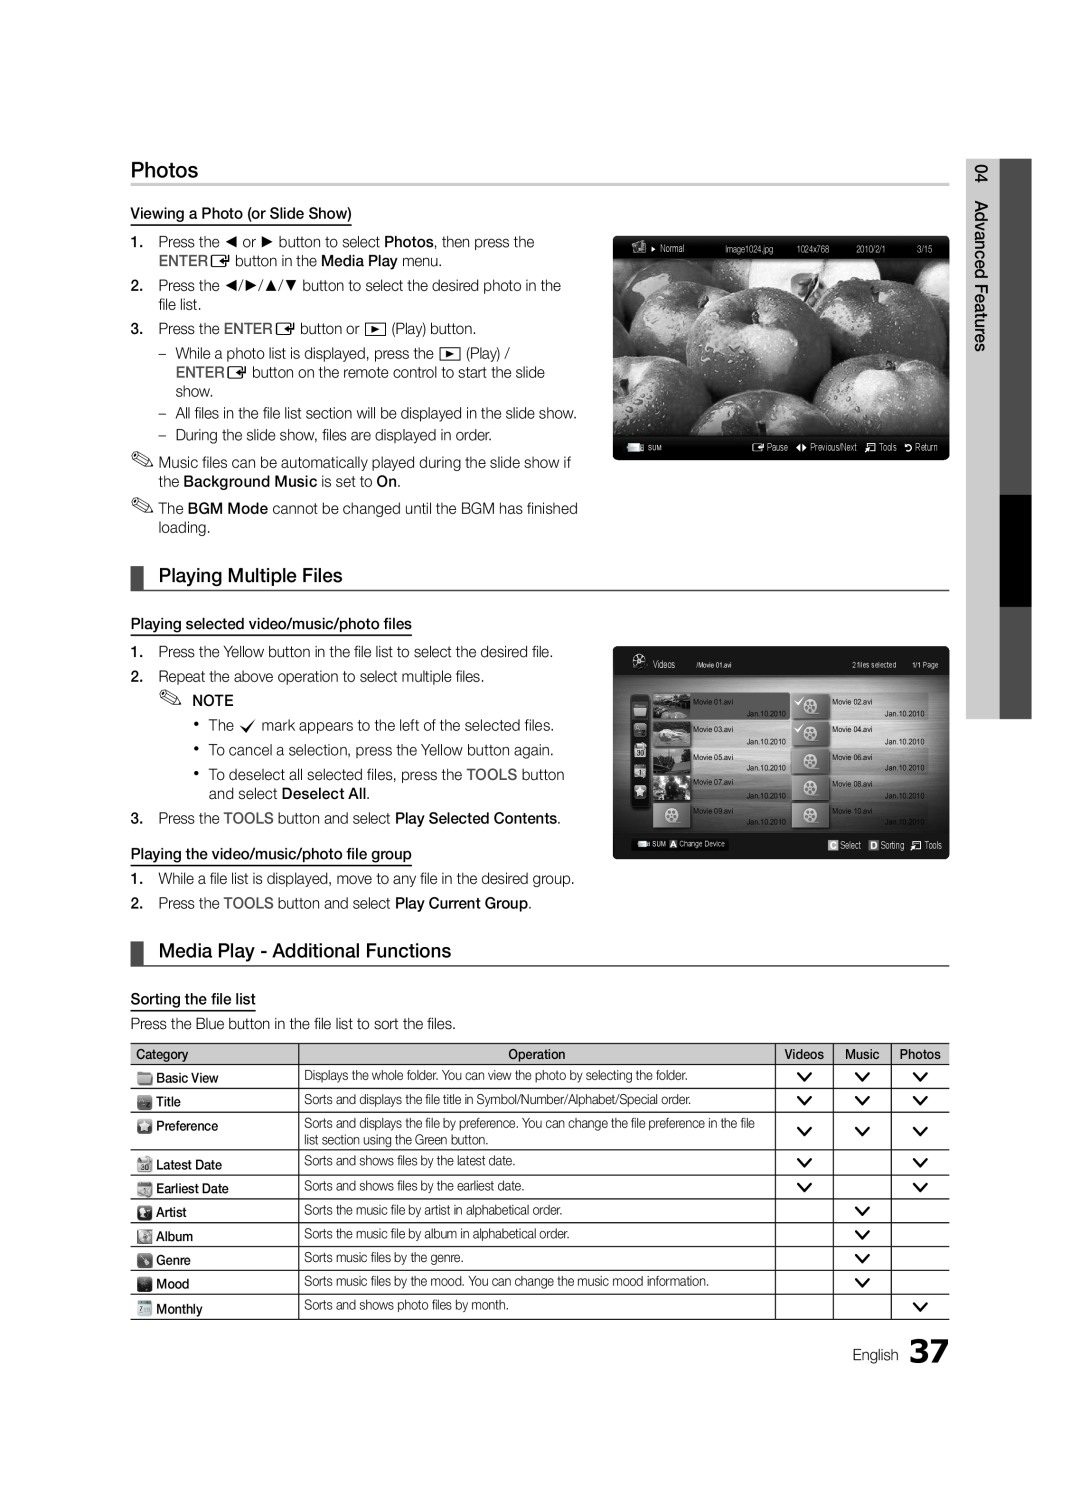 Samsung 6800 user manual Photos, Playing Multiple Files, Media Play - Additional Functions 